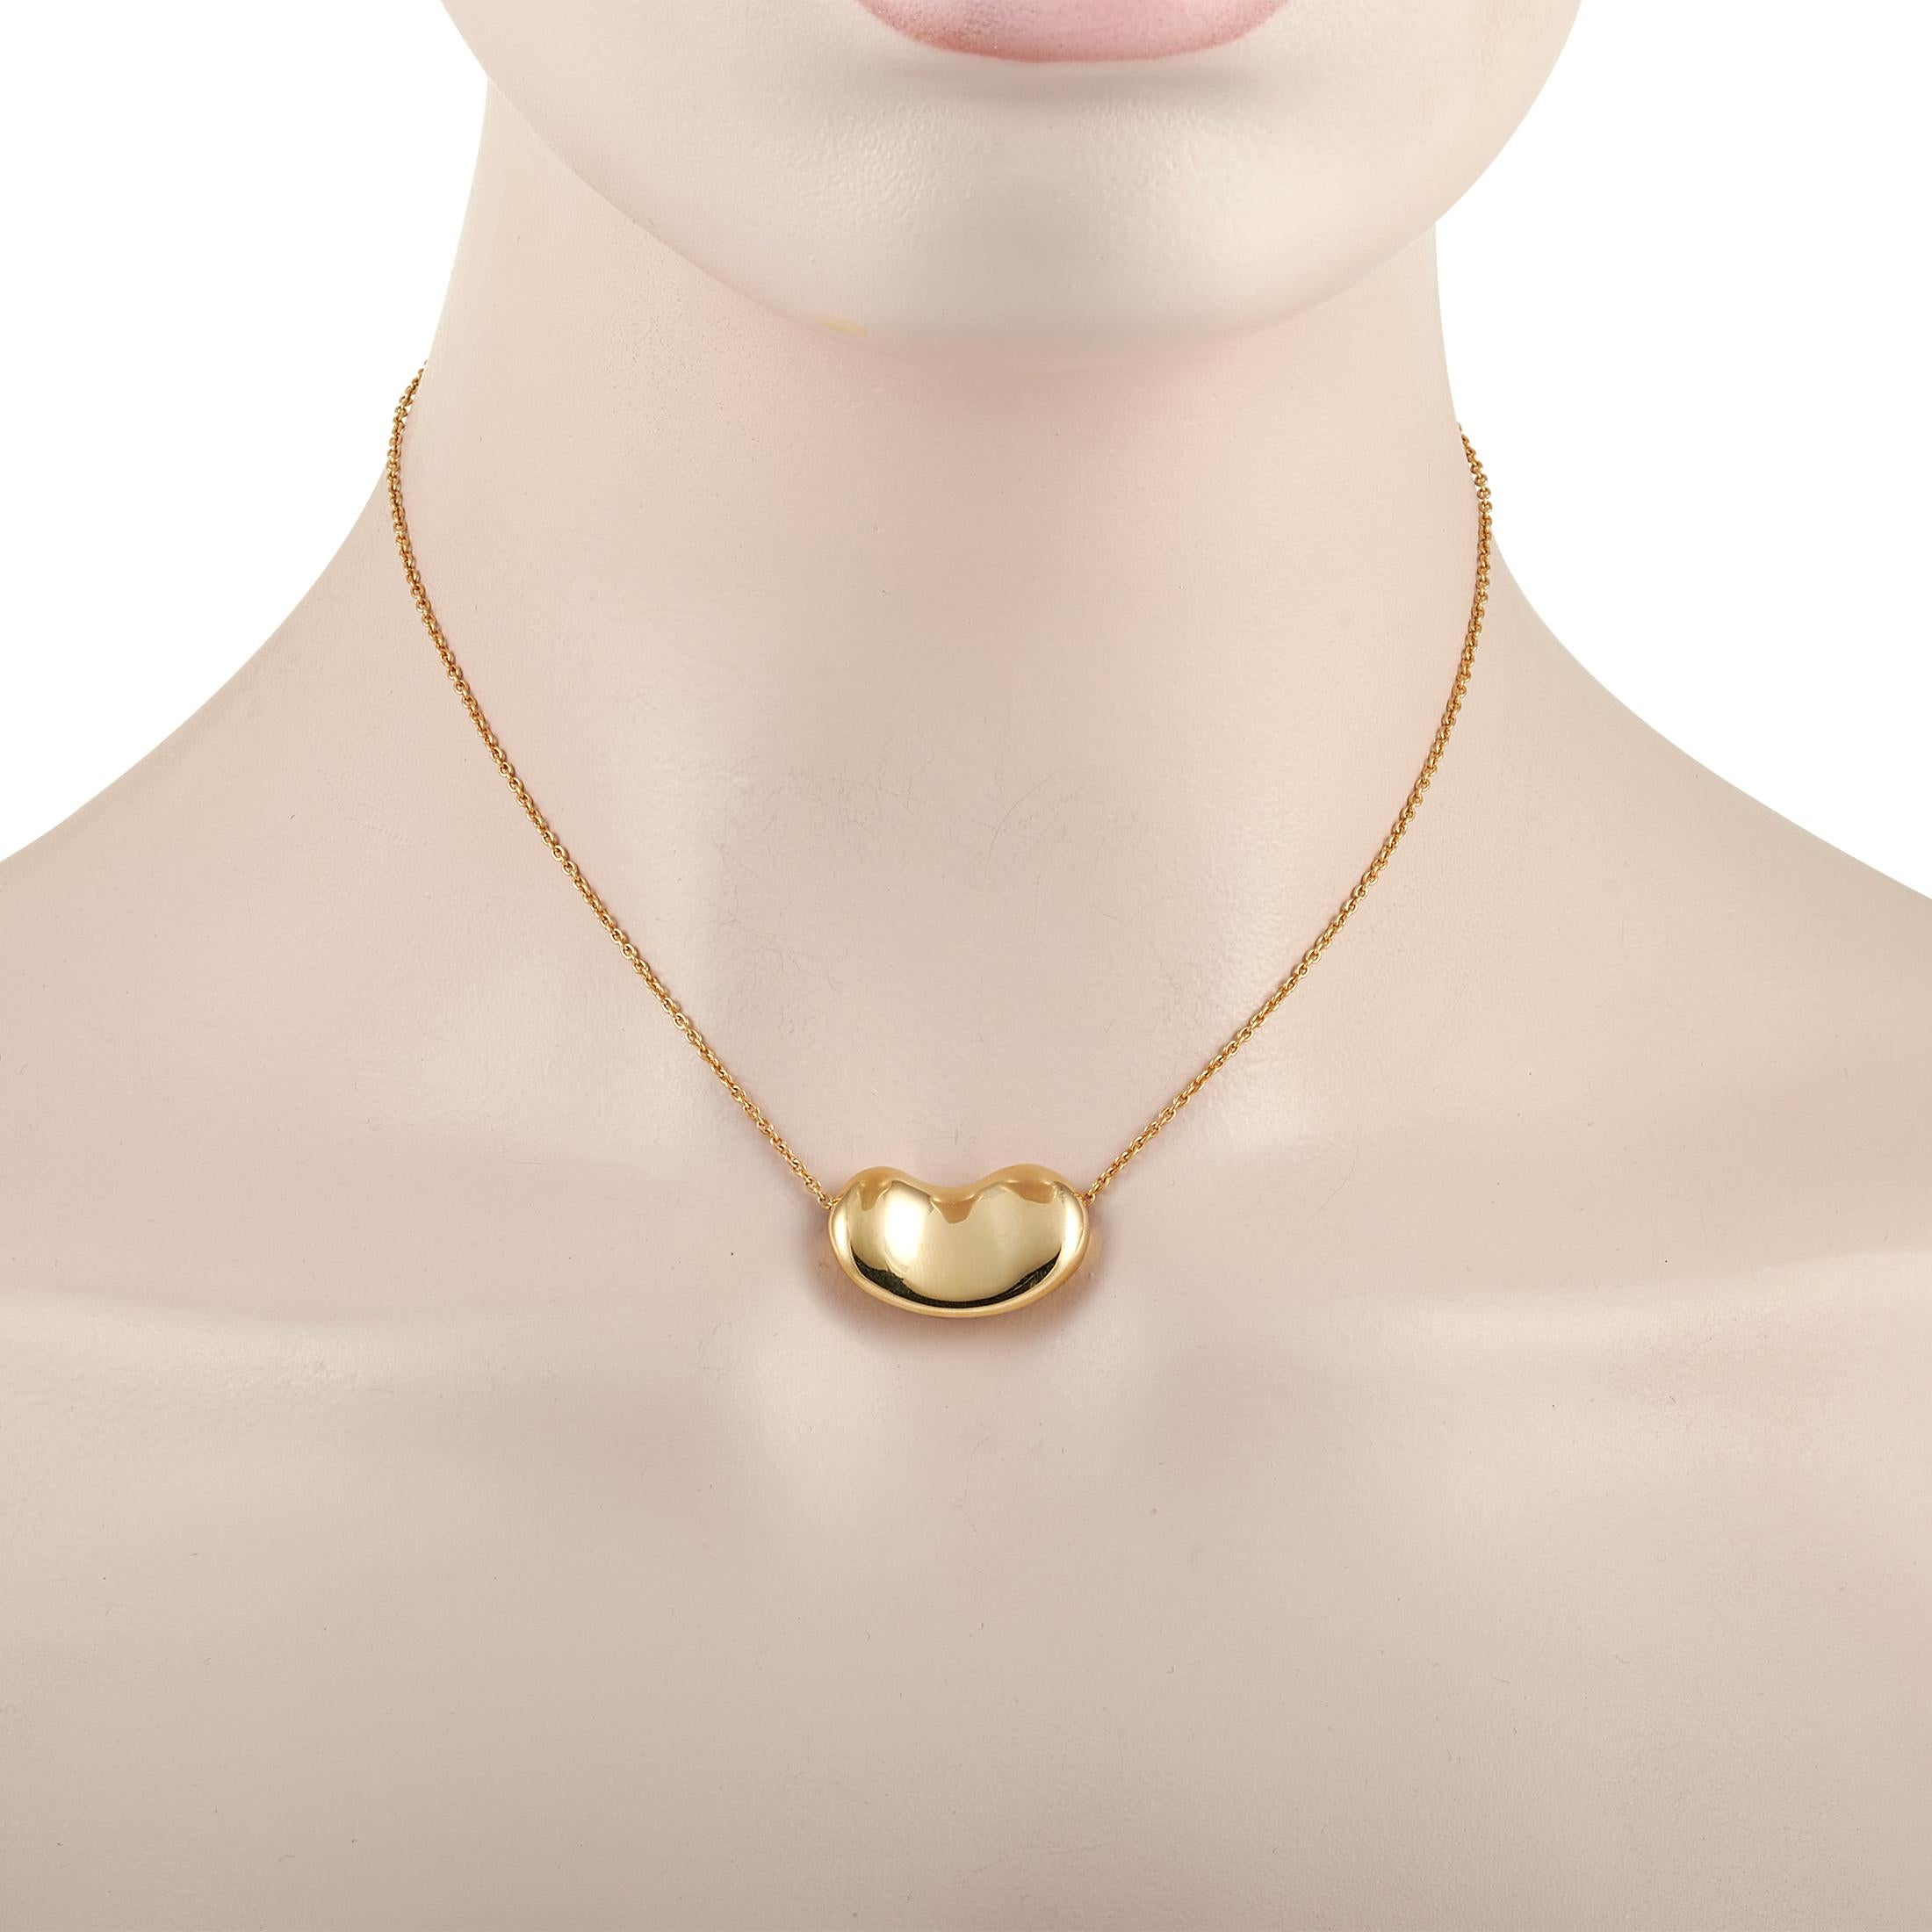 This classic Tiffany & Co. Elsa Peretti 18K Yellow Gold Large Bean Necklace is crafted from 18K yellow gold and features a bean pendant designed by Elsa Peretti. The dainty chain measures 14 inches in length and features a spring ring closure. The